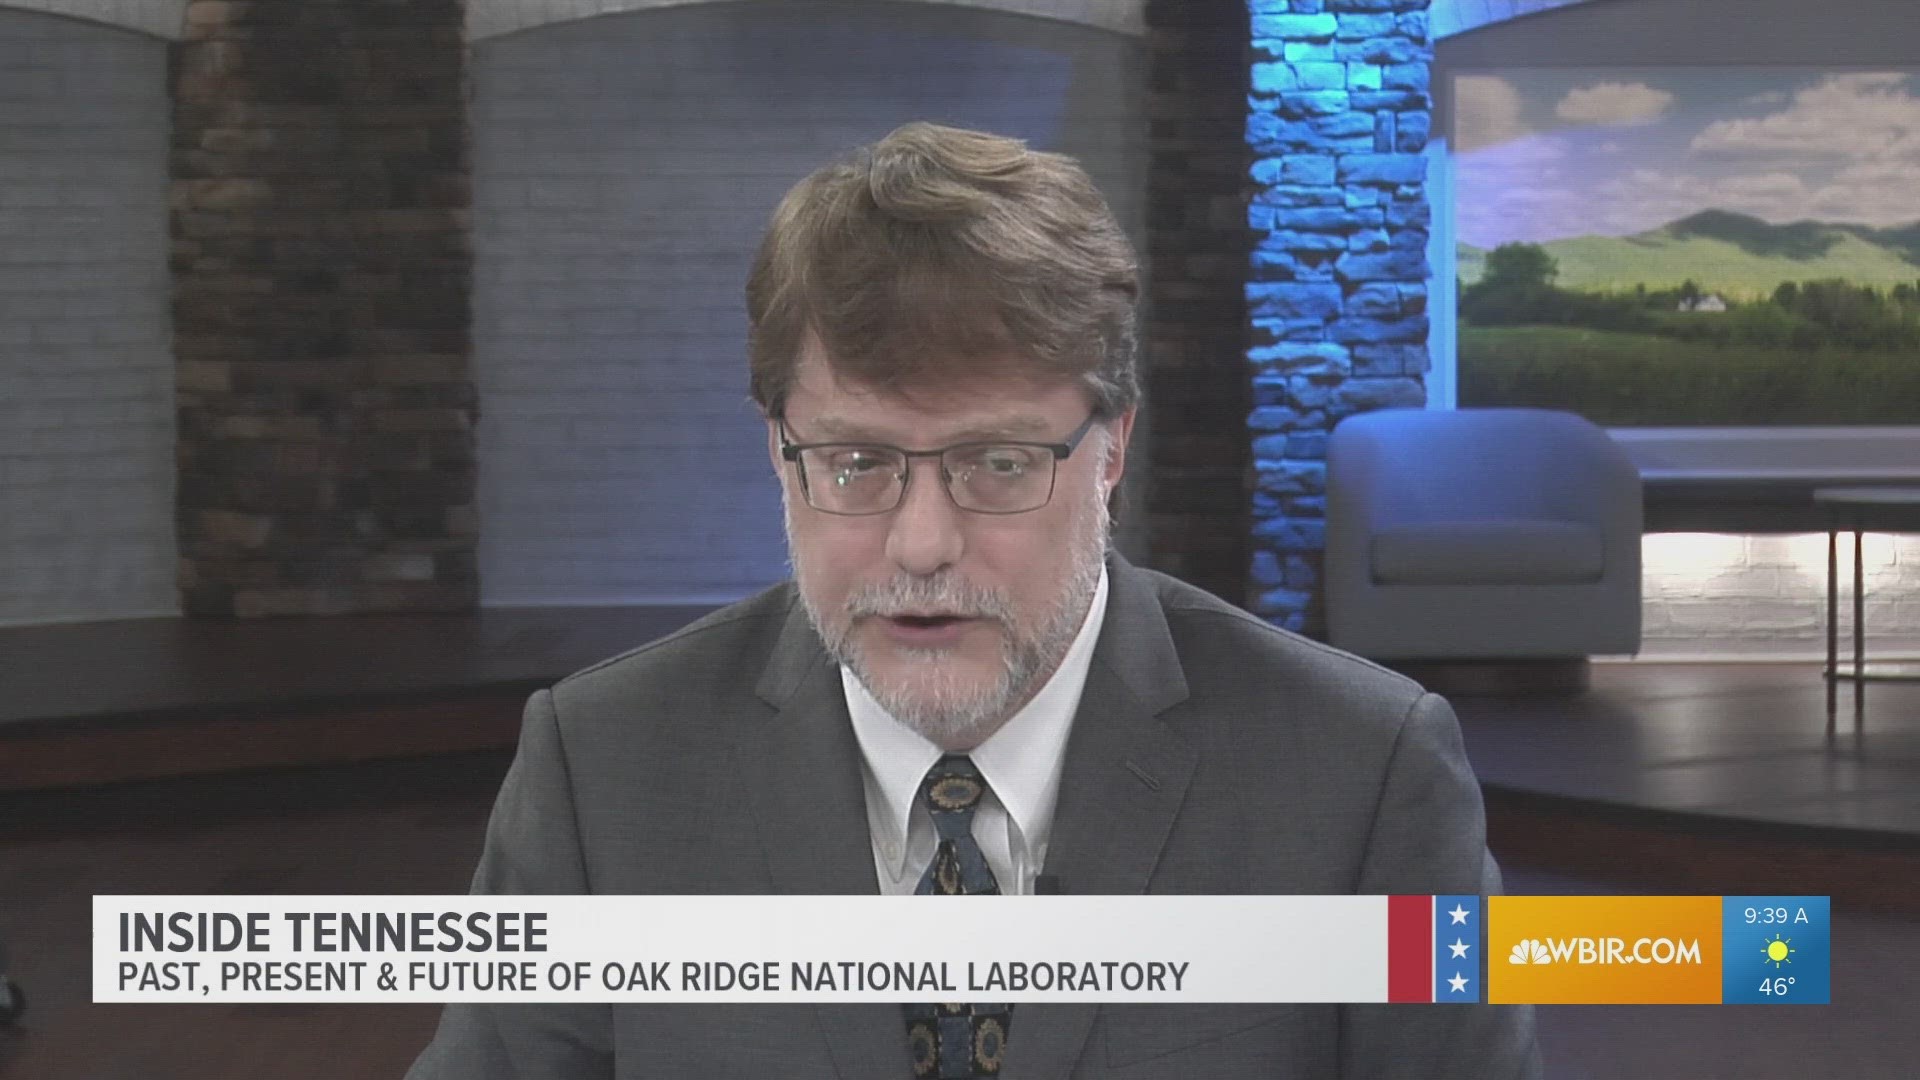 New ORNL Director Stephen Streiffer talks about the lab.